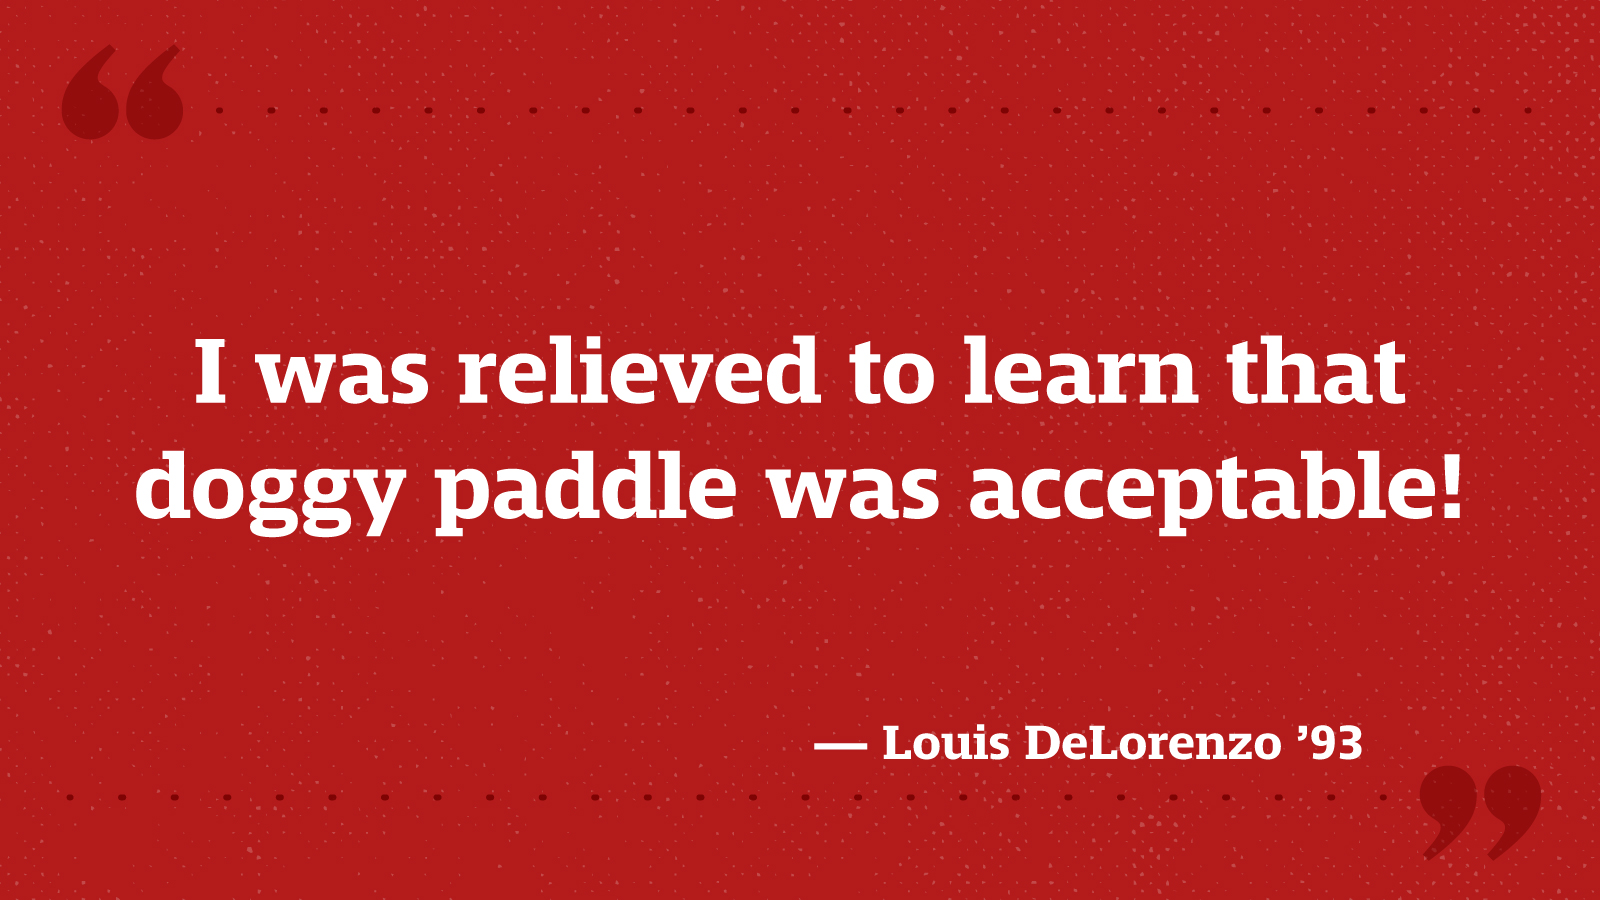 I was relieved to learn that doggy paddle was acceptable! — Louis DeLorenzo ’93